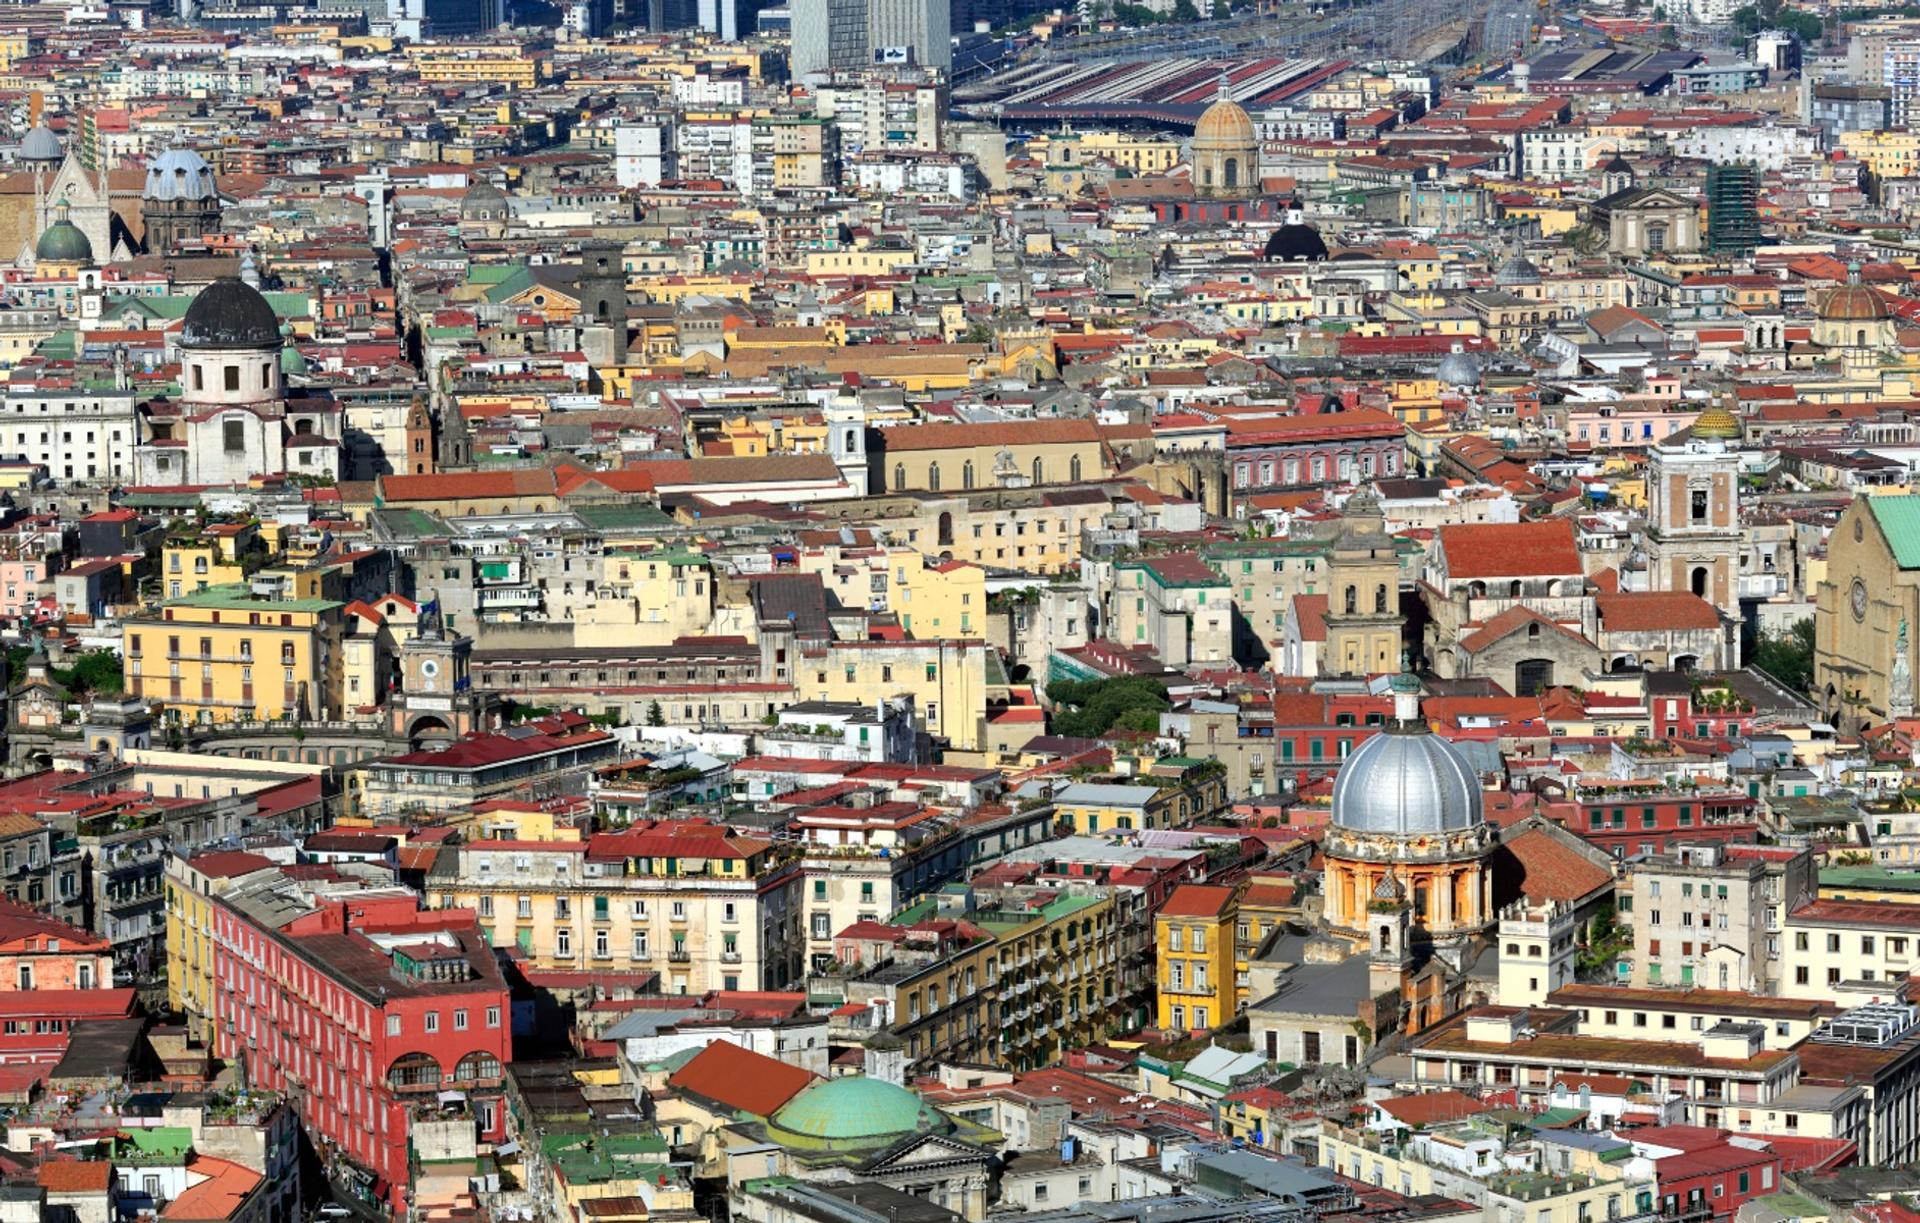 An aerial view of Naples